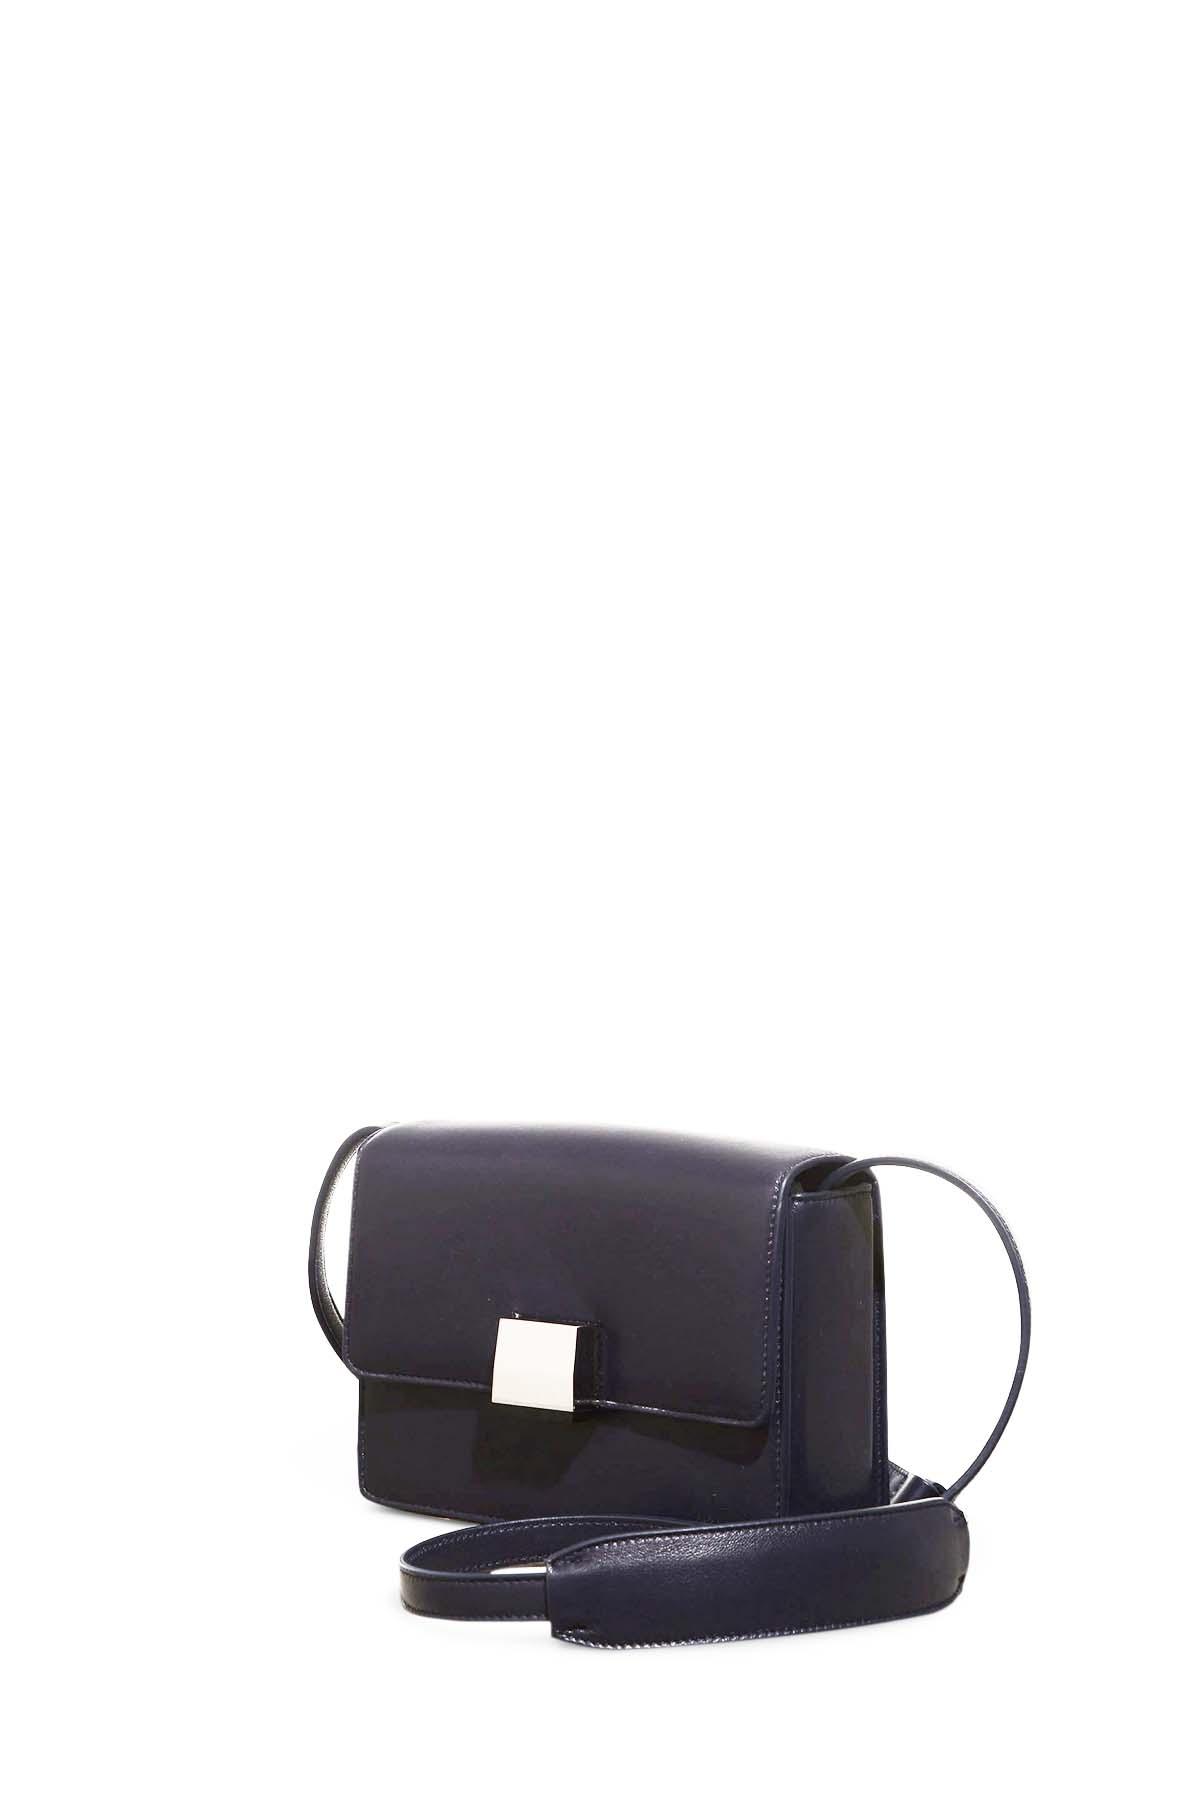 Mercedes Crossbody Bag in Navy Nappa Leather